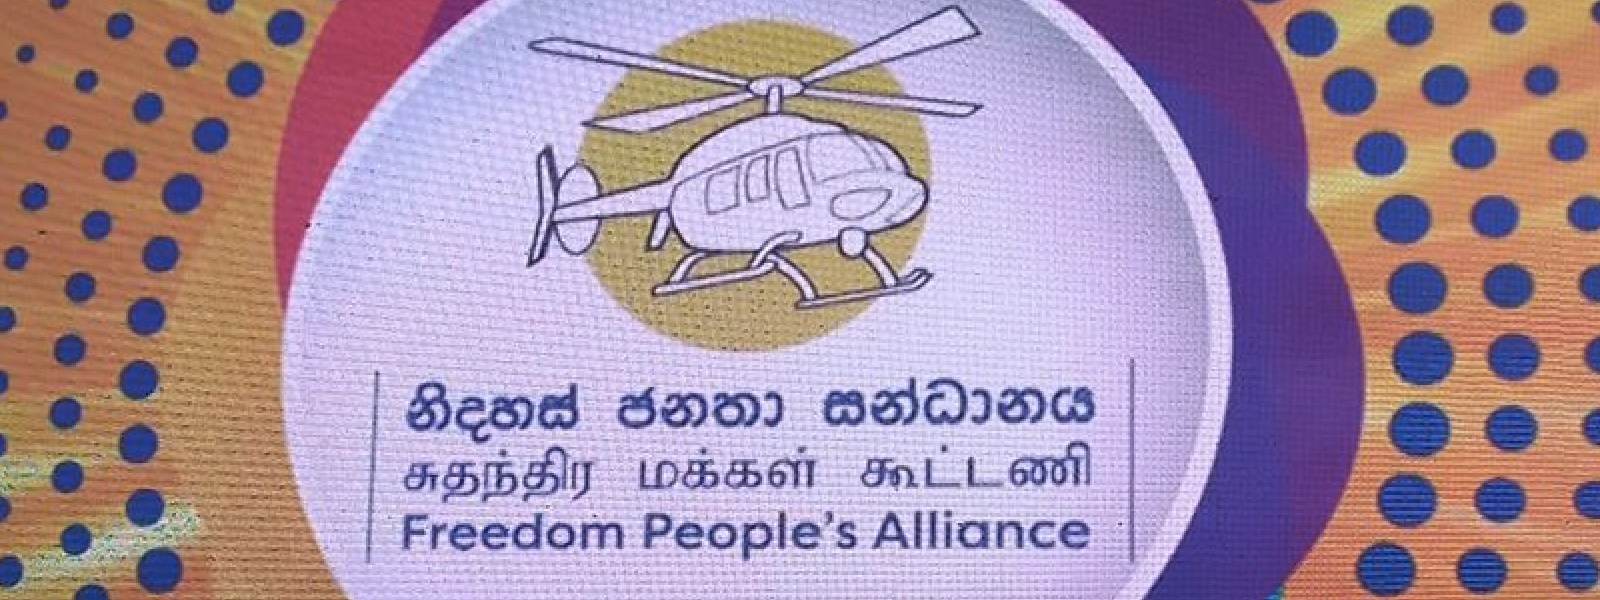 The helicopter will never land at Medamulana